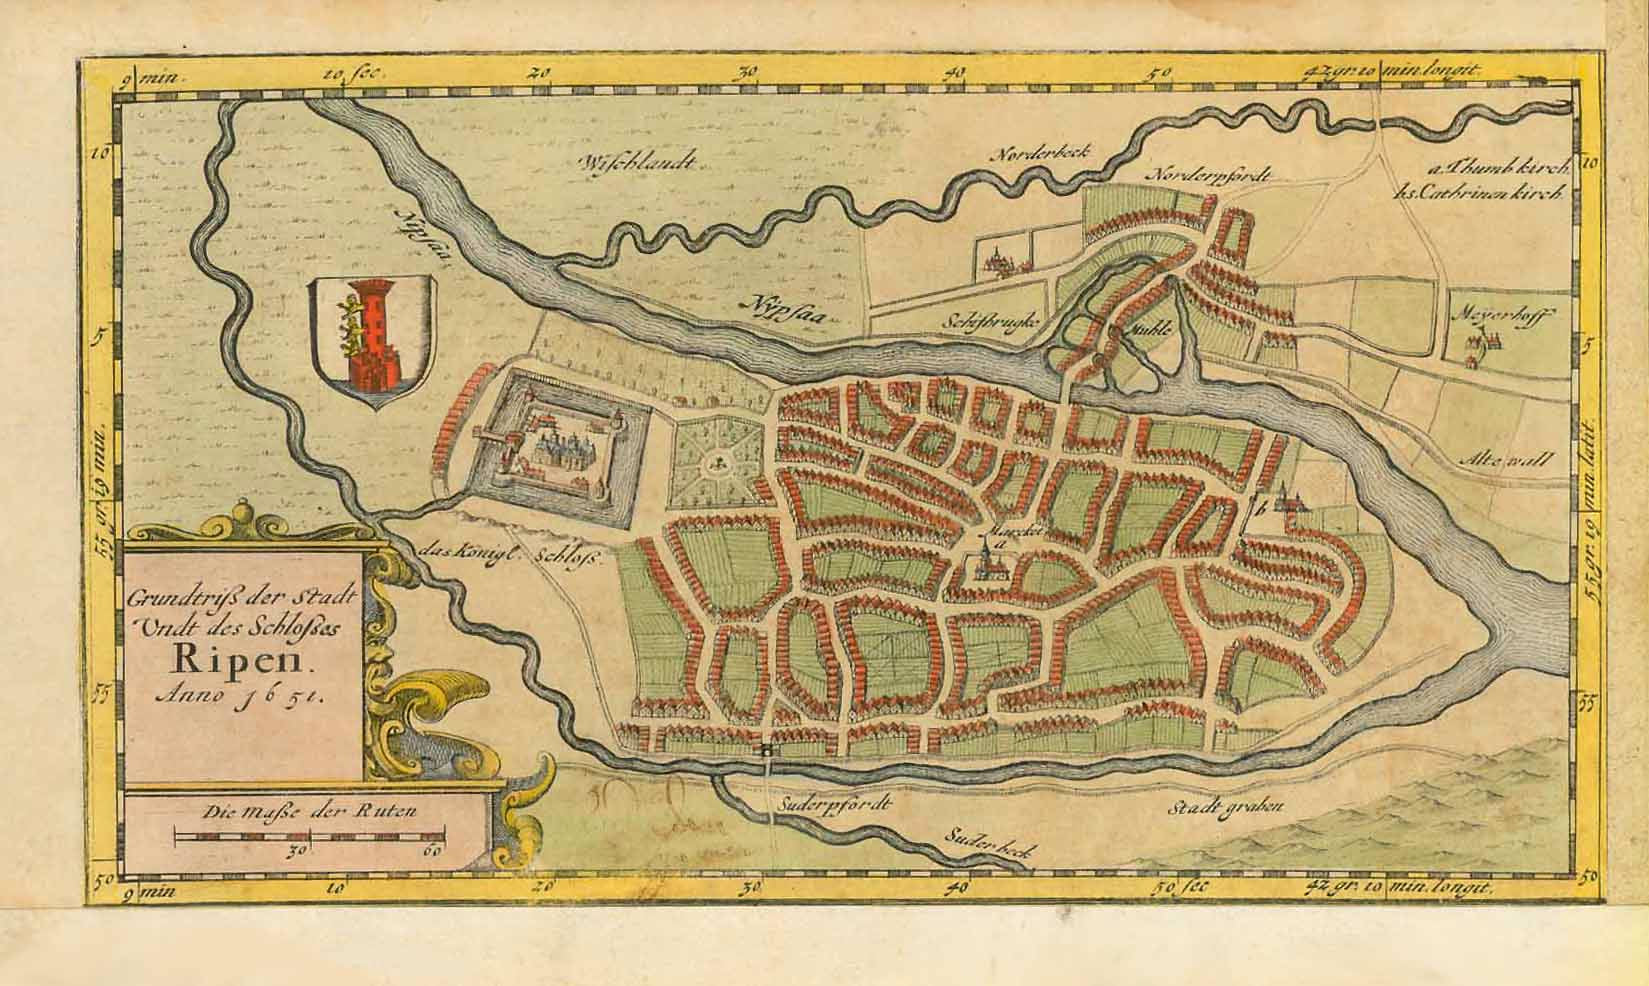 "Grundriss der Stadt und des Schlosses Ripen Anno 1651". Plan of city and castle of Ribe, Denmark. Hand-colored opper etching dated 1651 and published in Johannes Mejer atlas of Schleswig and Holstein. Husum, 1652.  Original antique print   For a 30% discount enter MAPS30 at chekout, interior design, wall decoration, ideas, idea, gift ideas, present, vintage, charming, special, decoration, home interior, living room design